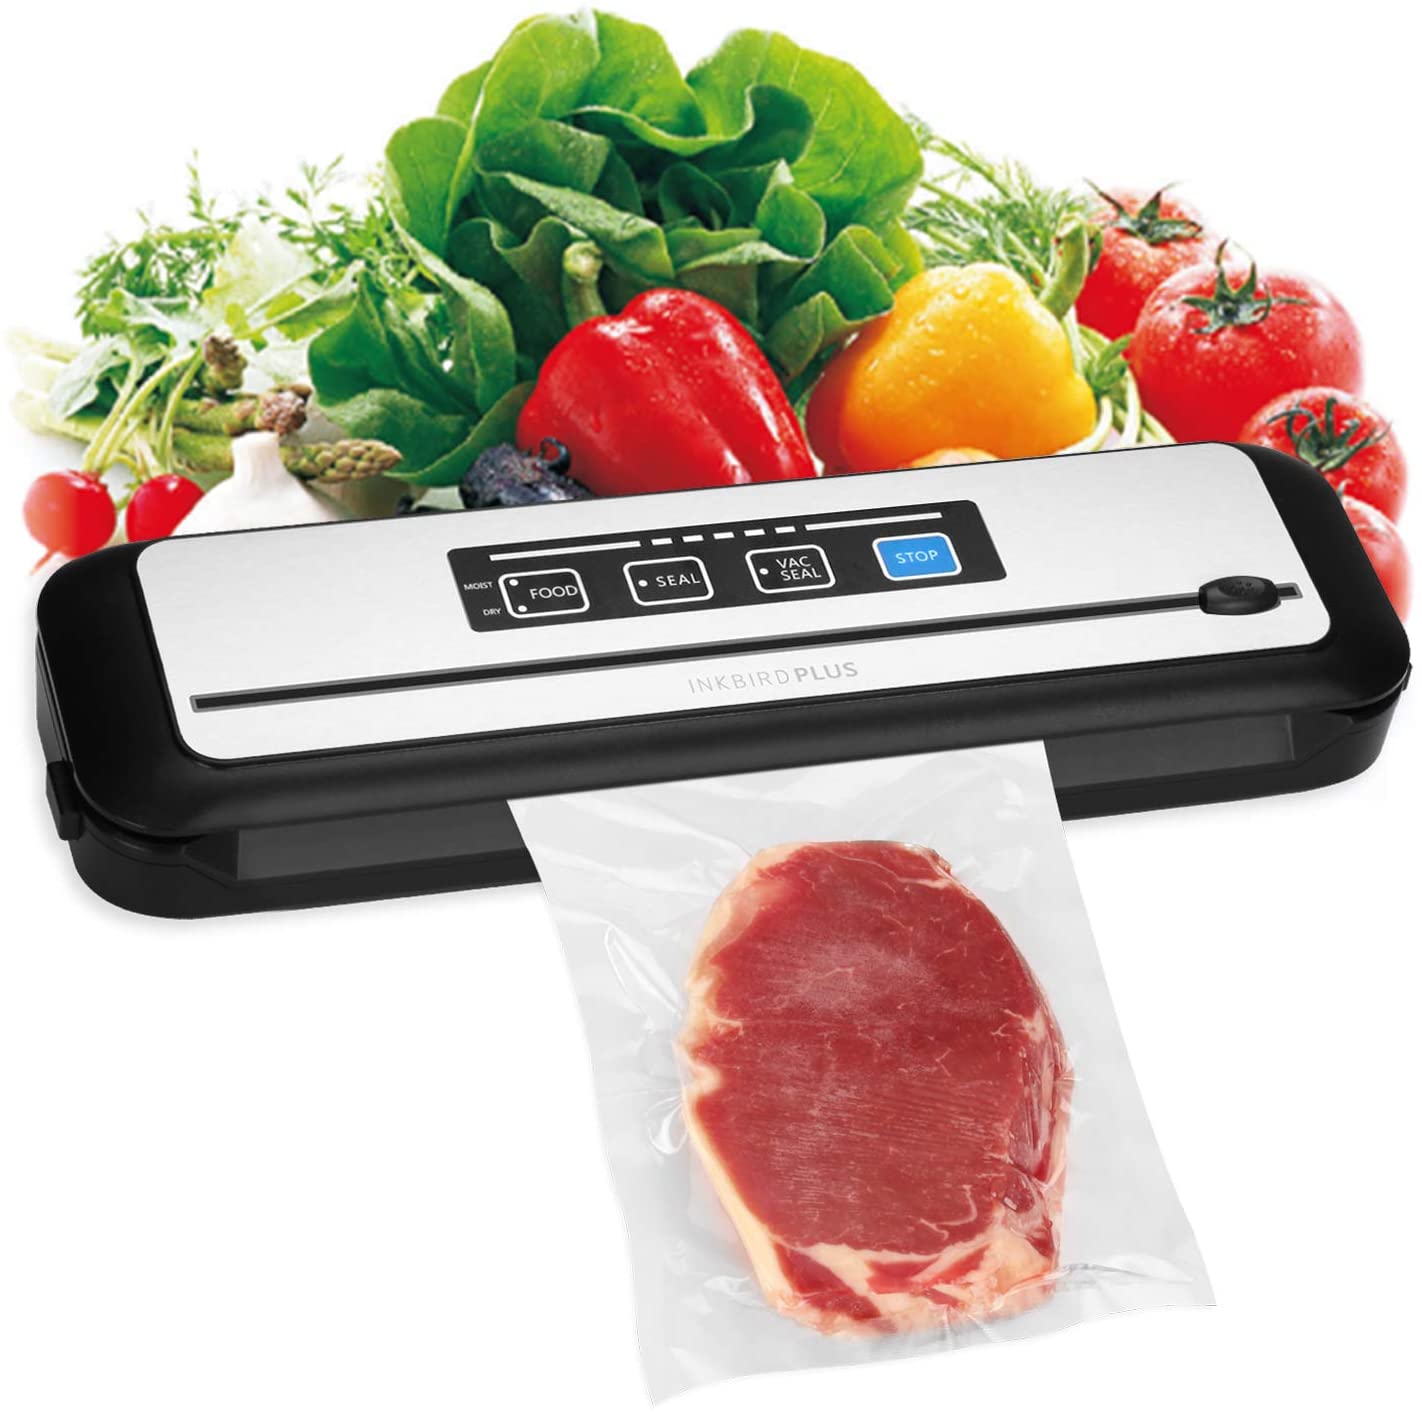 Inkbird Vacuum Sealer and Bag Cutter @ Amazon 30% off AC / Free Prime Shipping $38.49